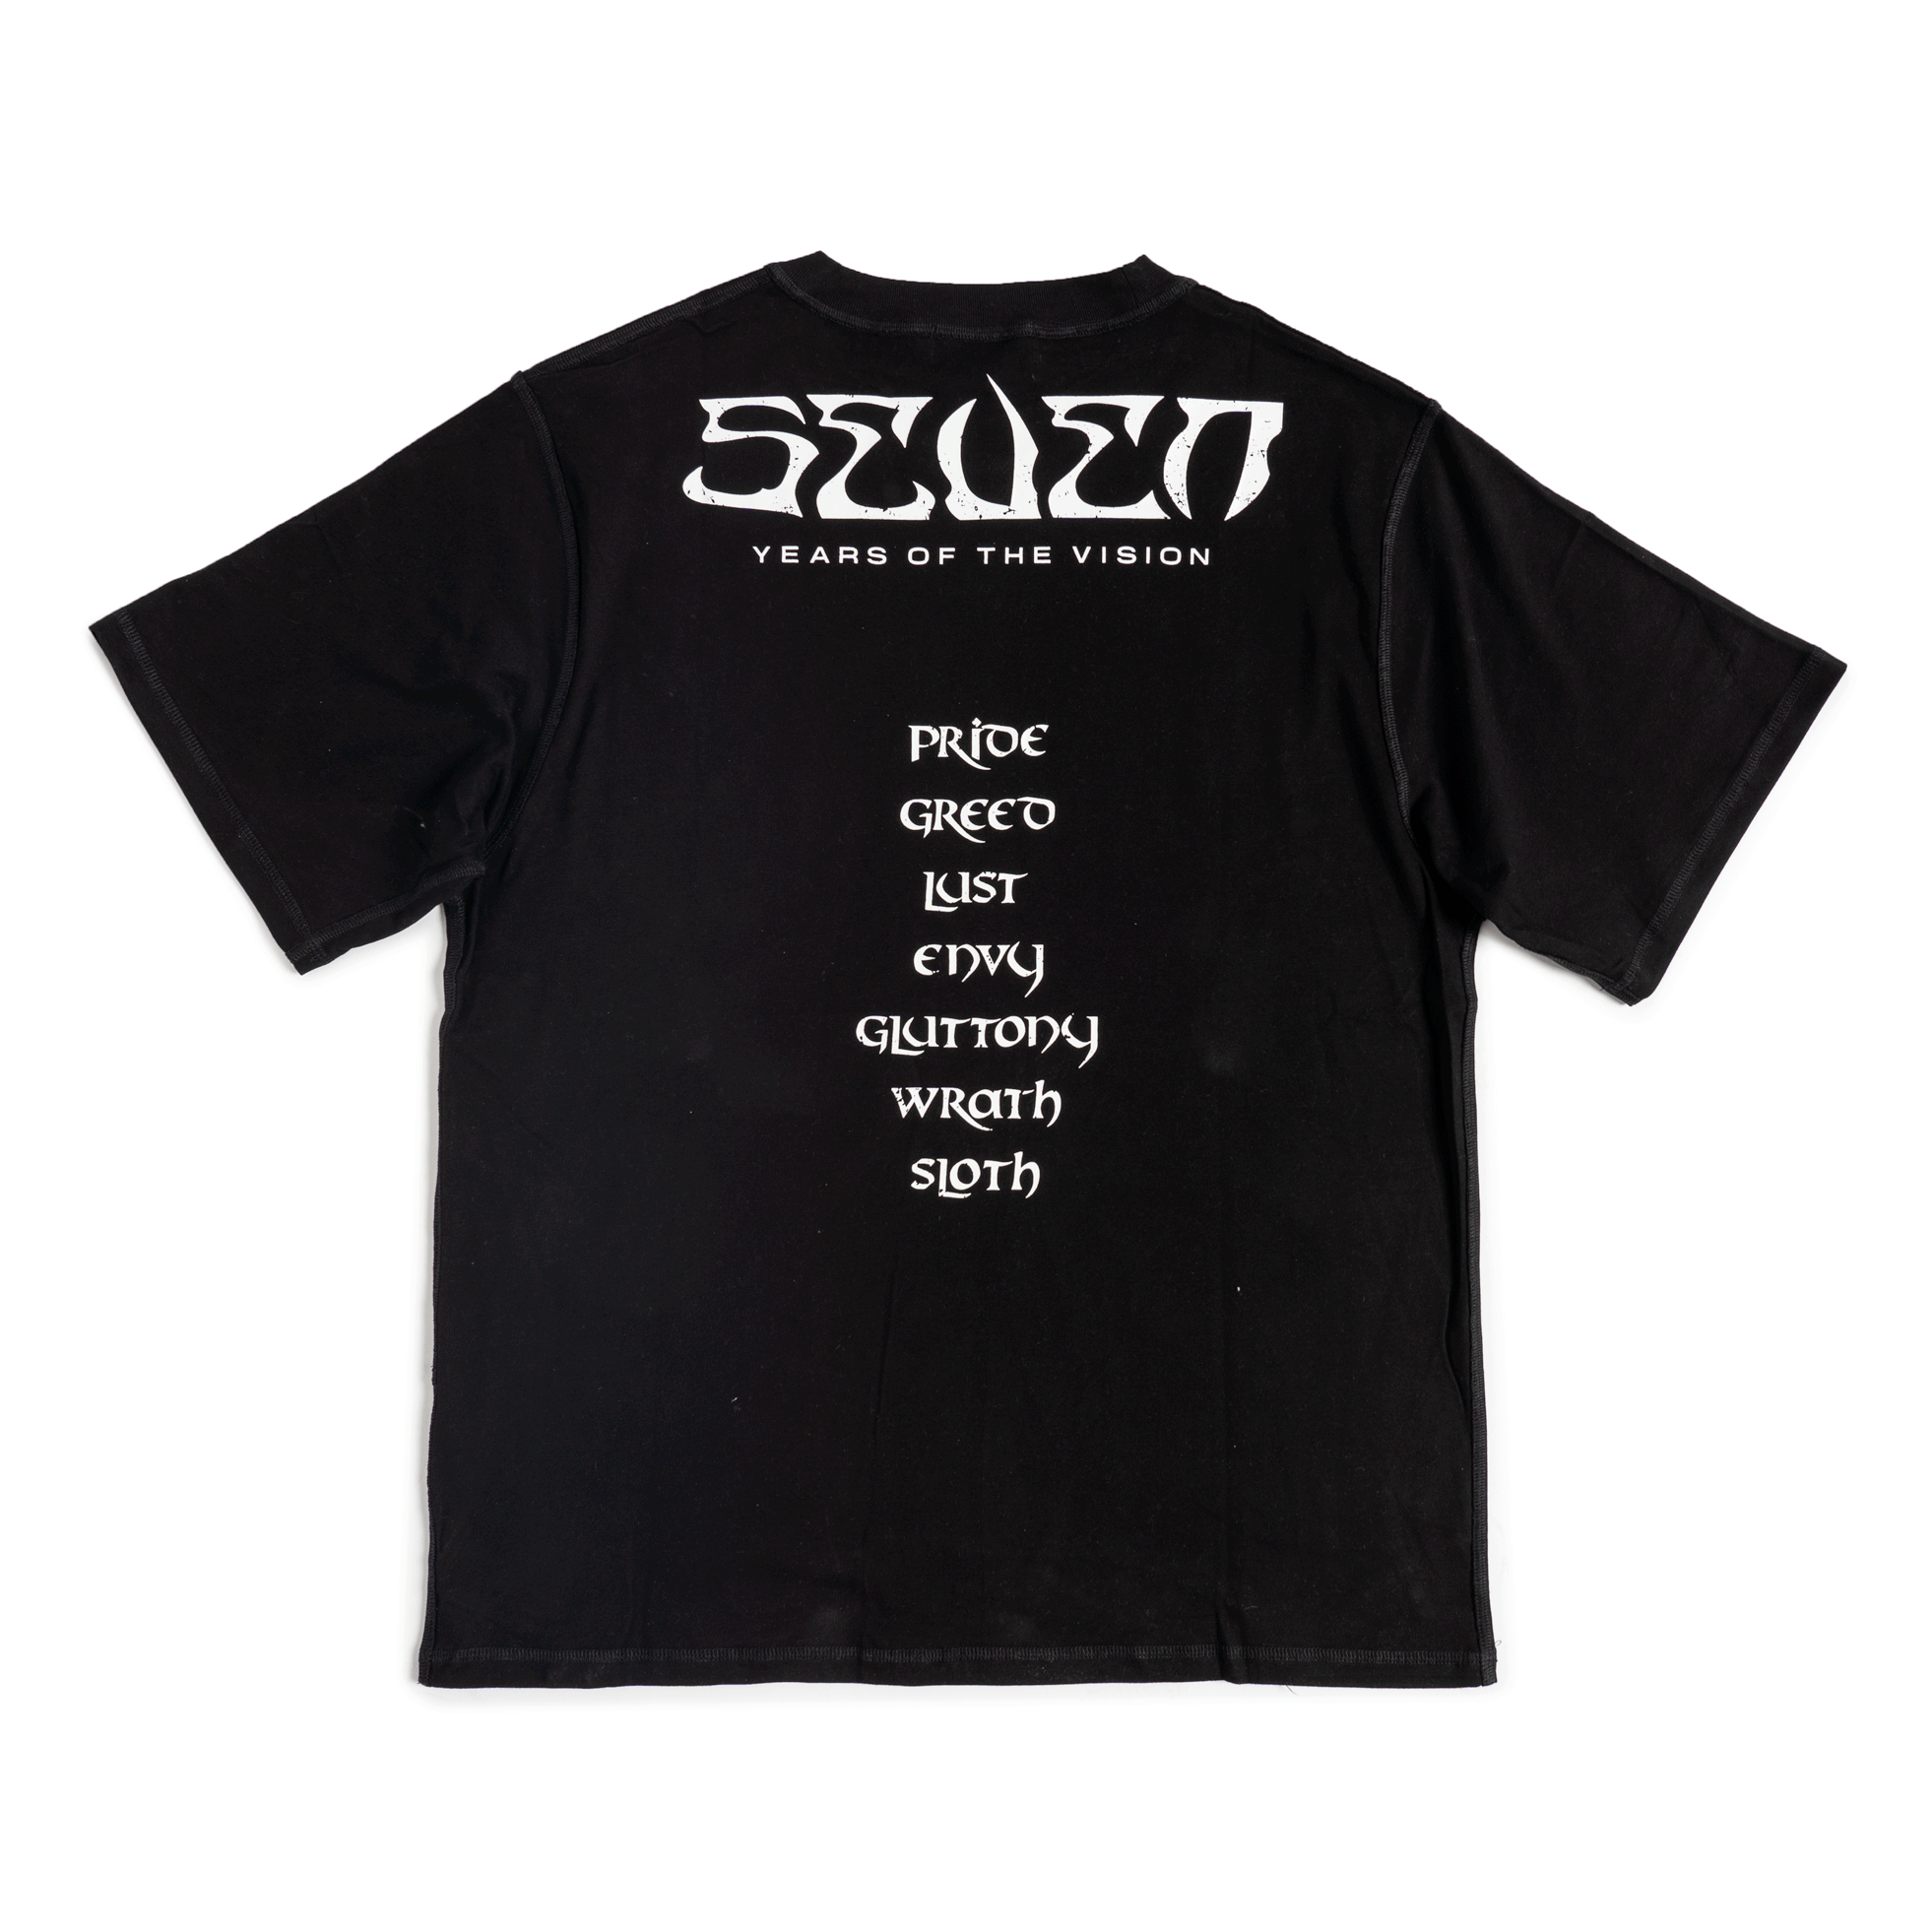 "SEVEN YEARS OF THE VISION" Oversized Shirt